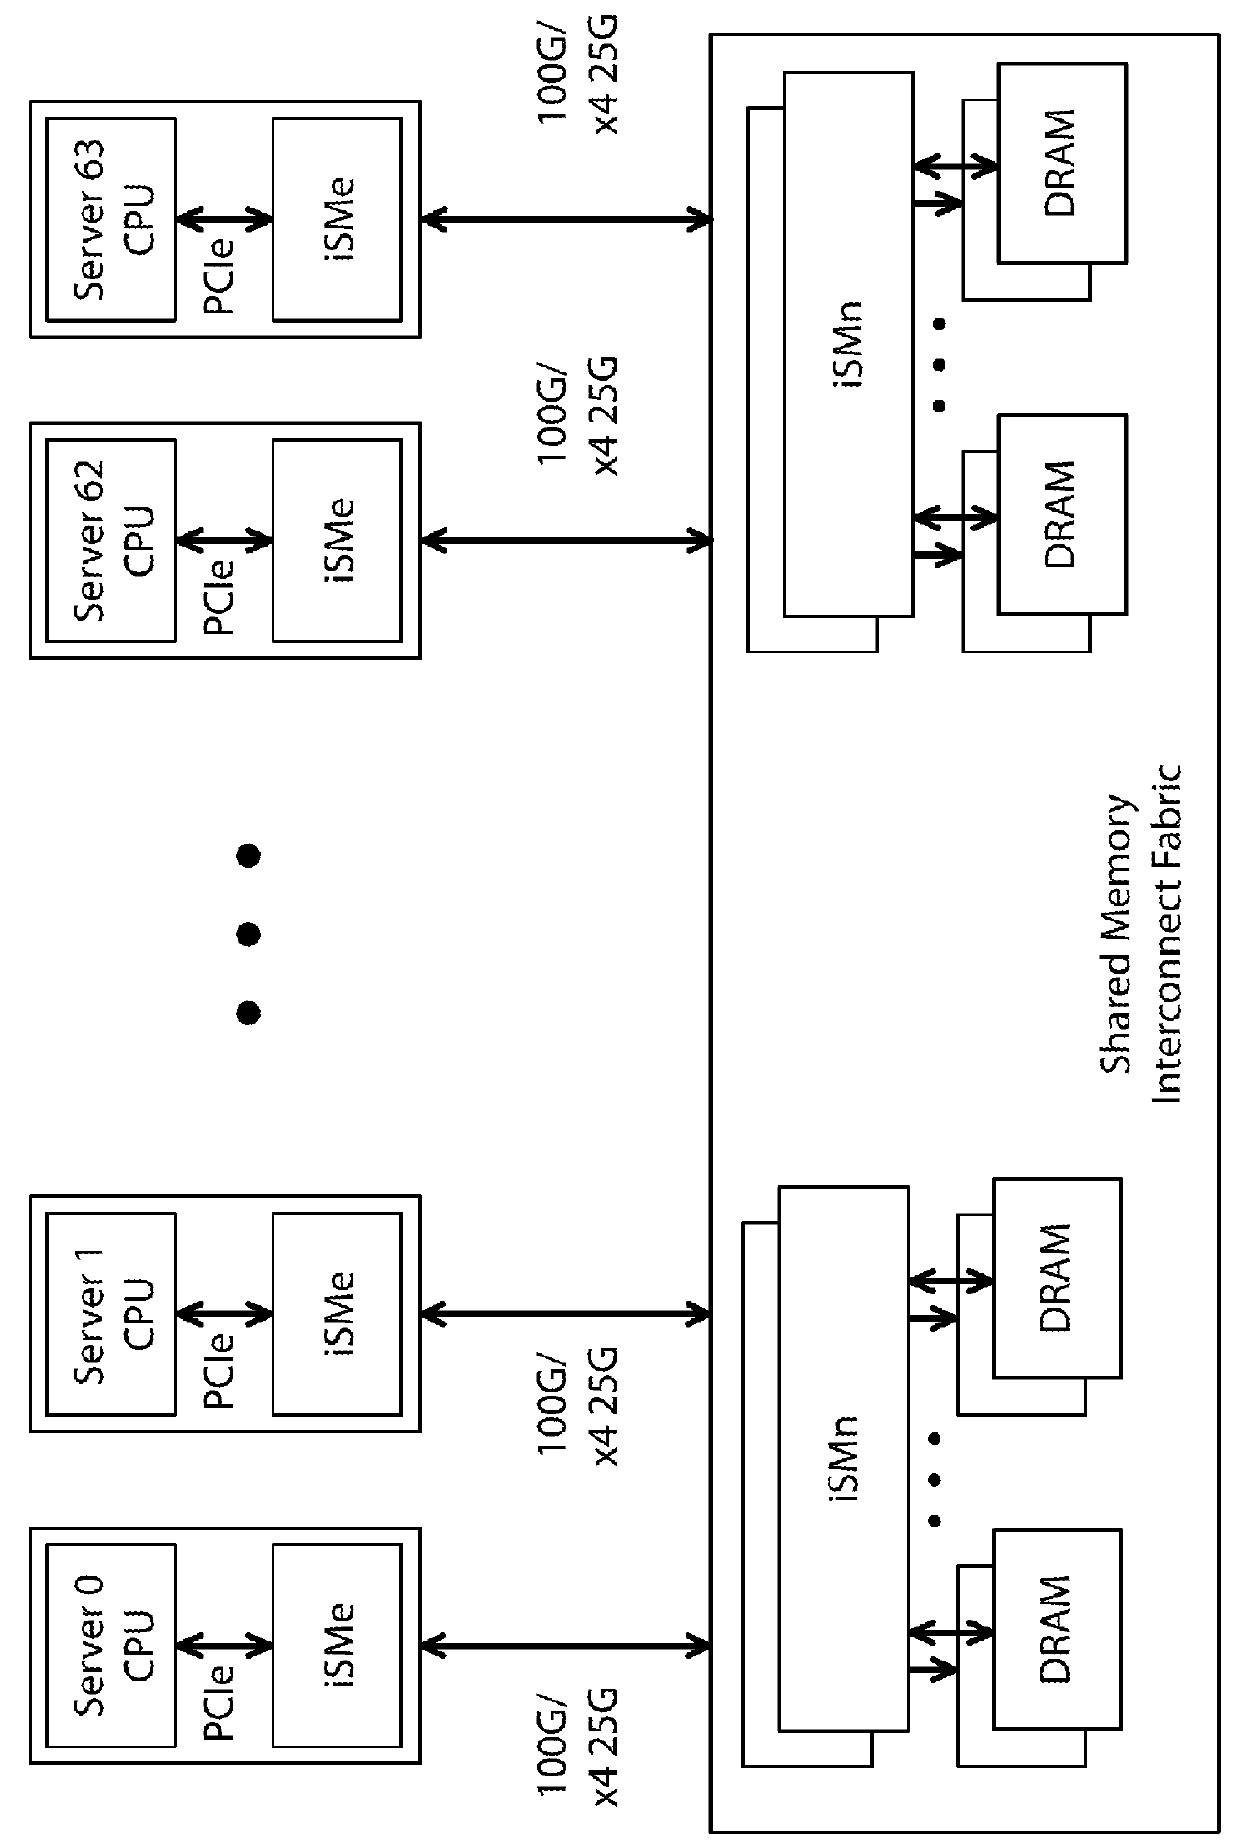 Isolated shared memory architecture (iSMA)